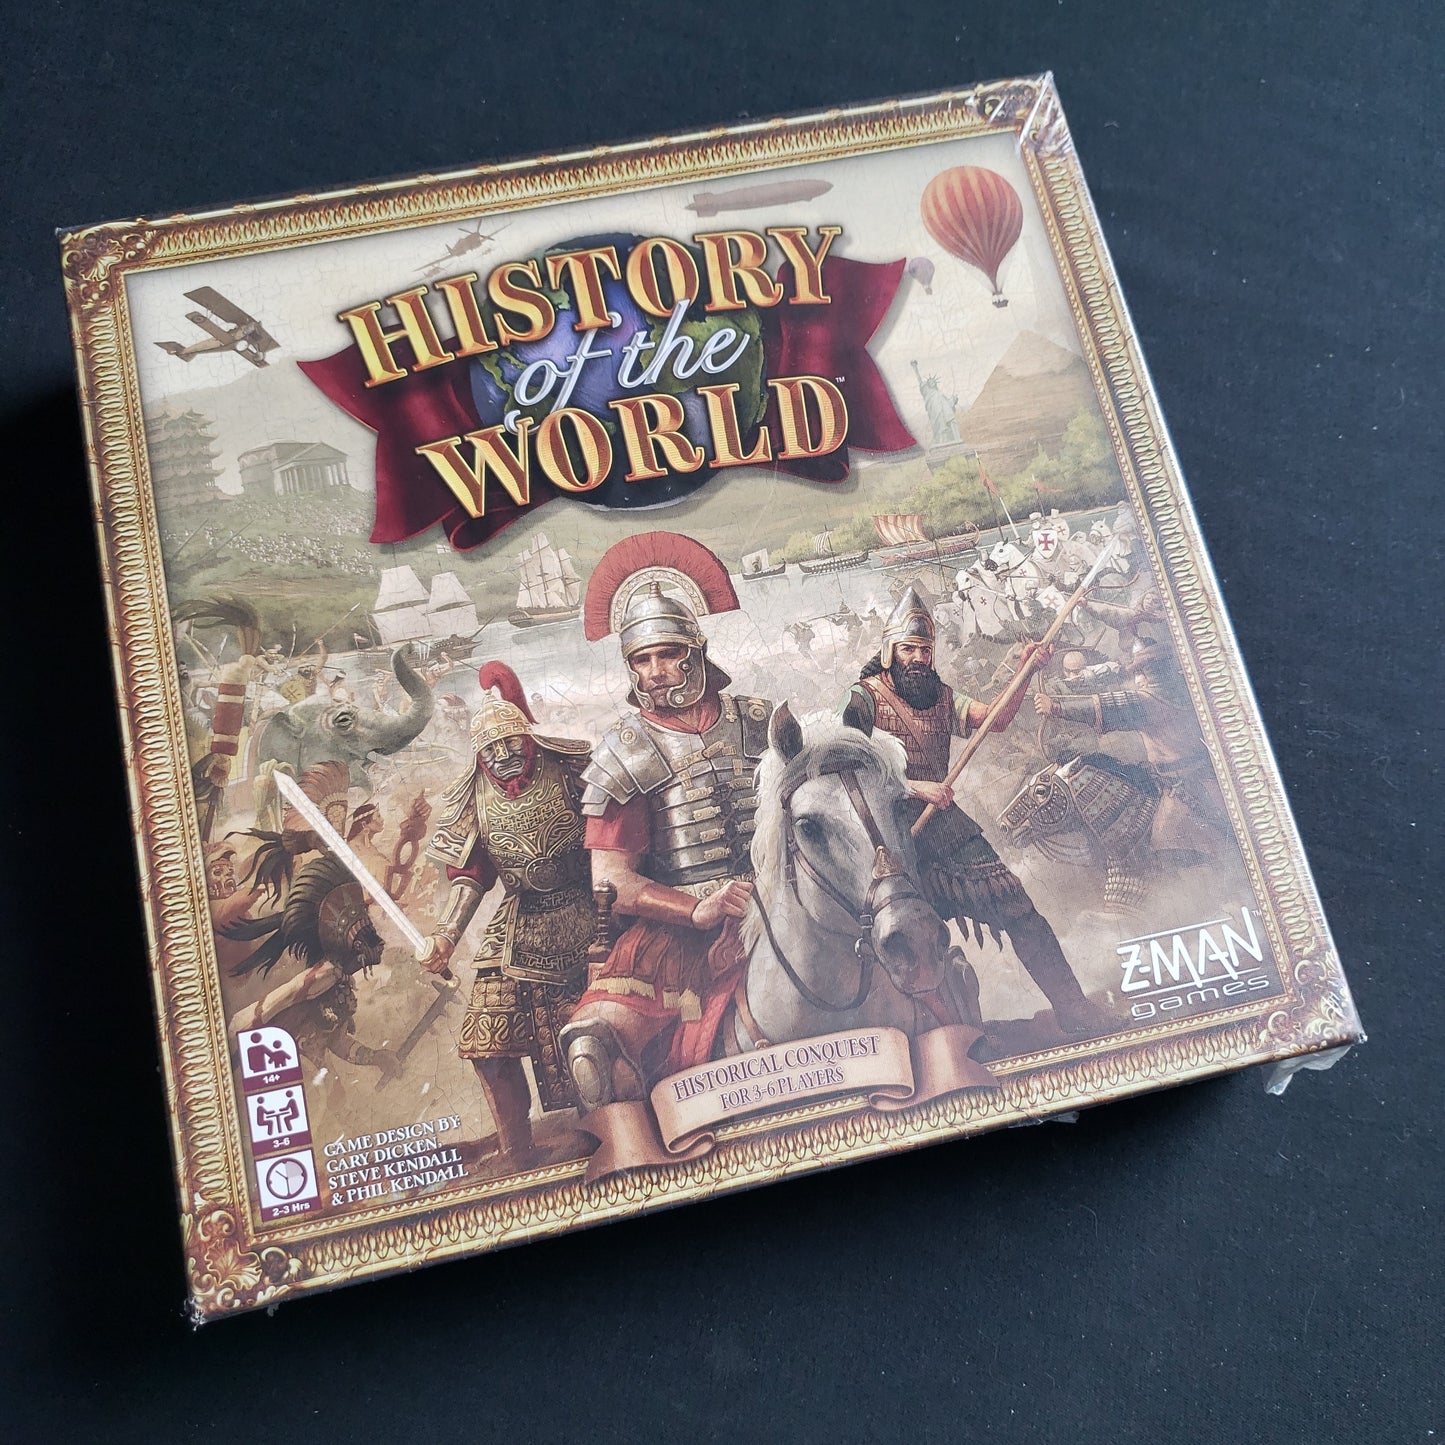 Image shows the front cover of the box of the History of the World board game